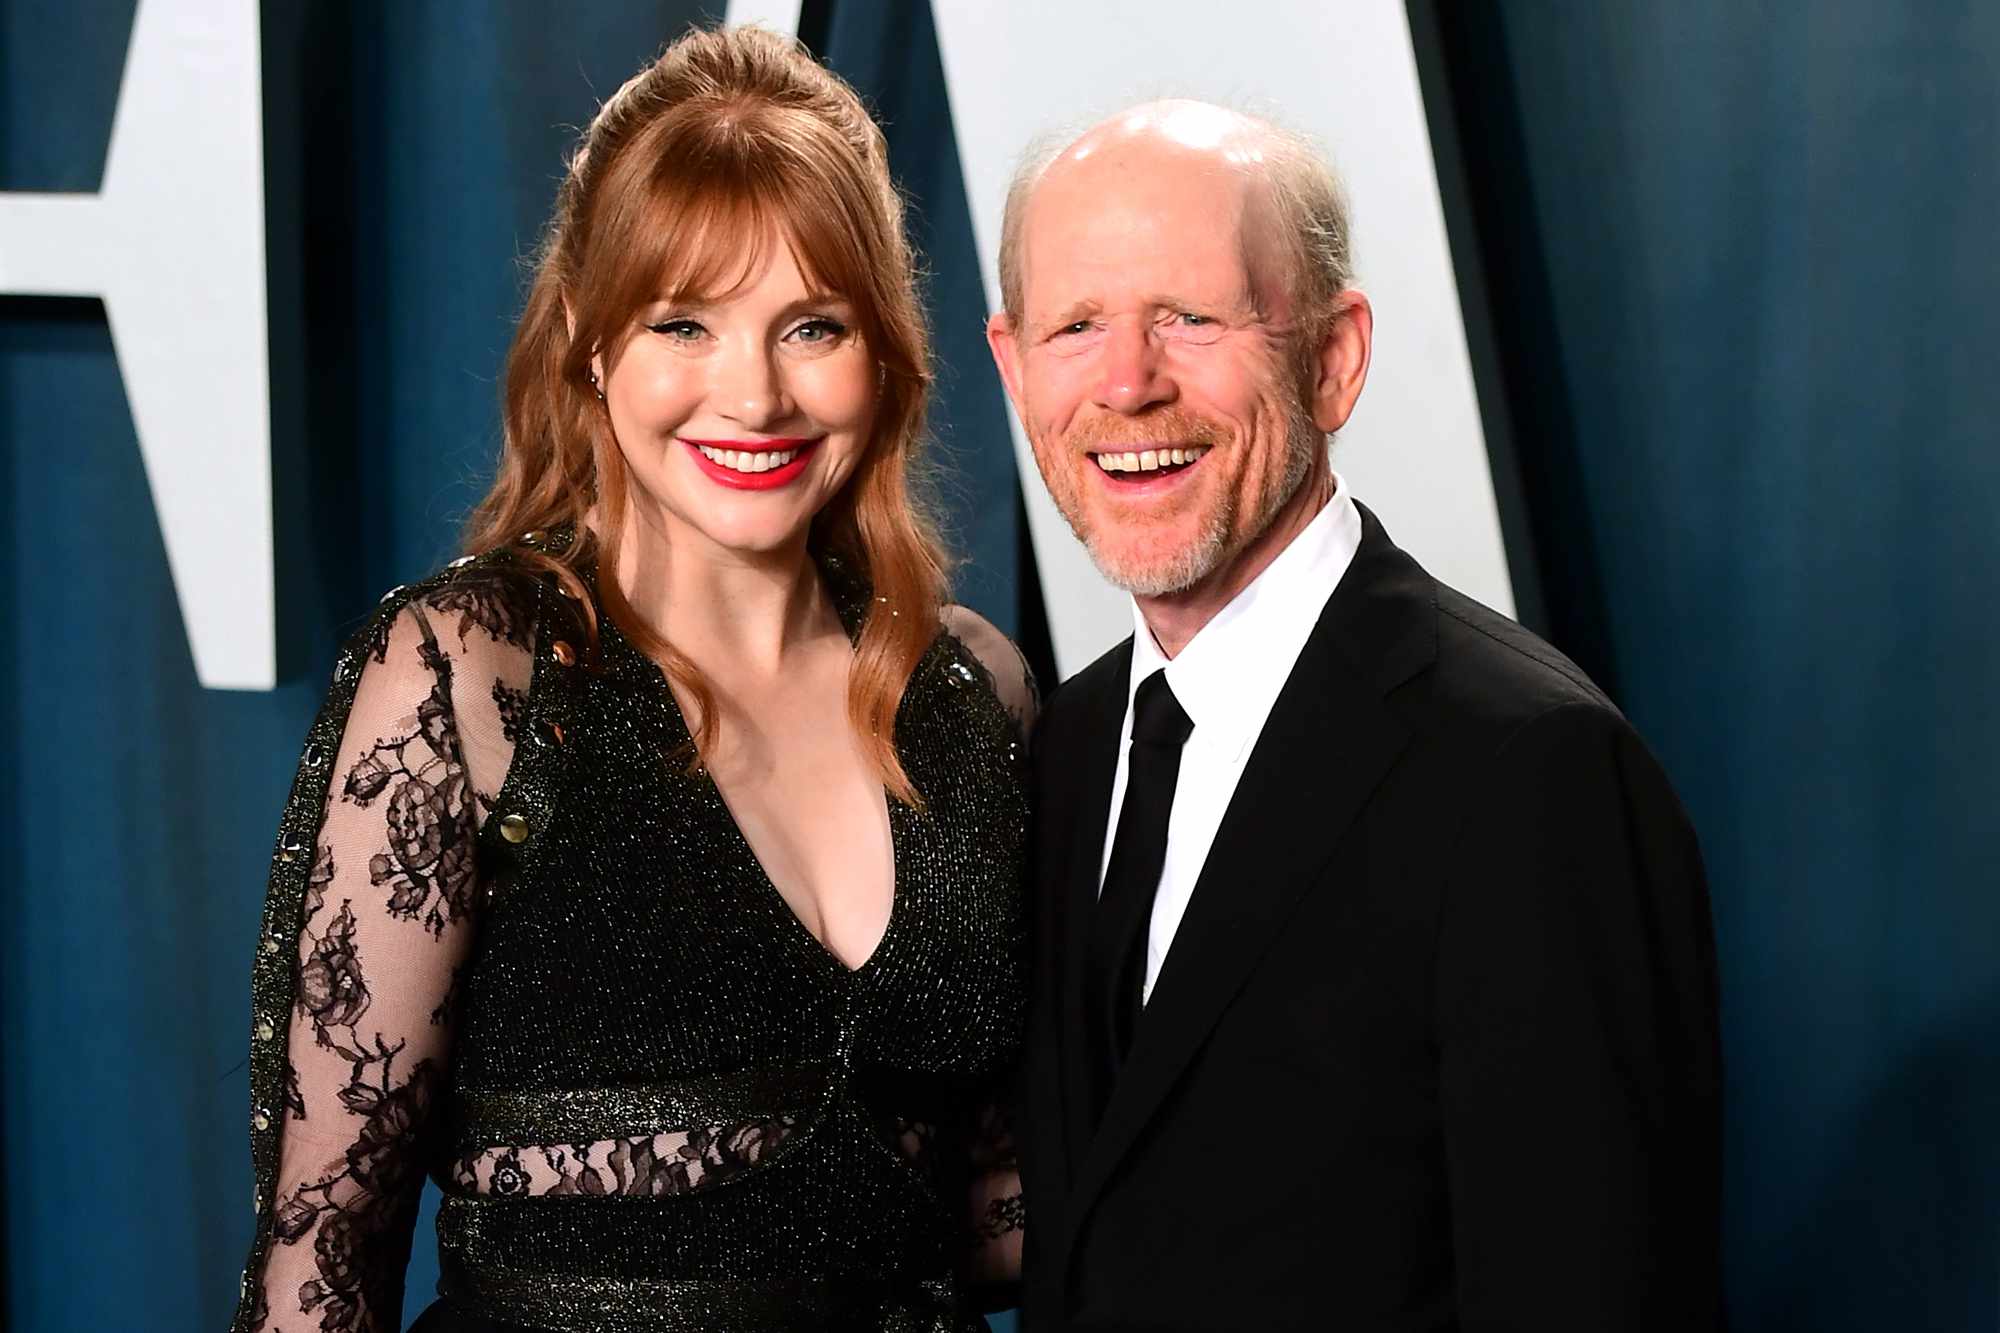 Bryce Dallas Howard and Ron Howard attending the Vanity Fair Oscar Party held at the Wallis Annenberg Center for the Performing Arts in Beverly Hills, Los Angeles, California, USA.